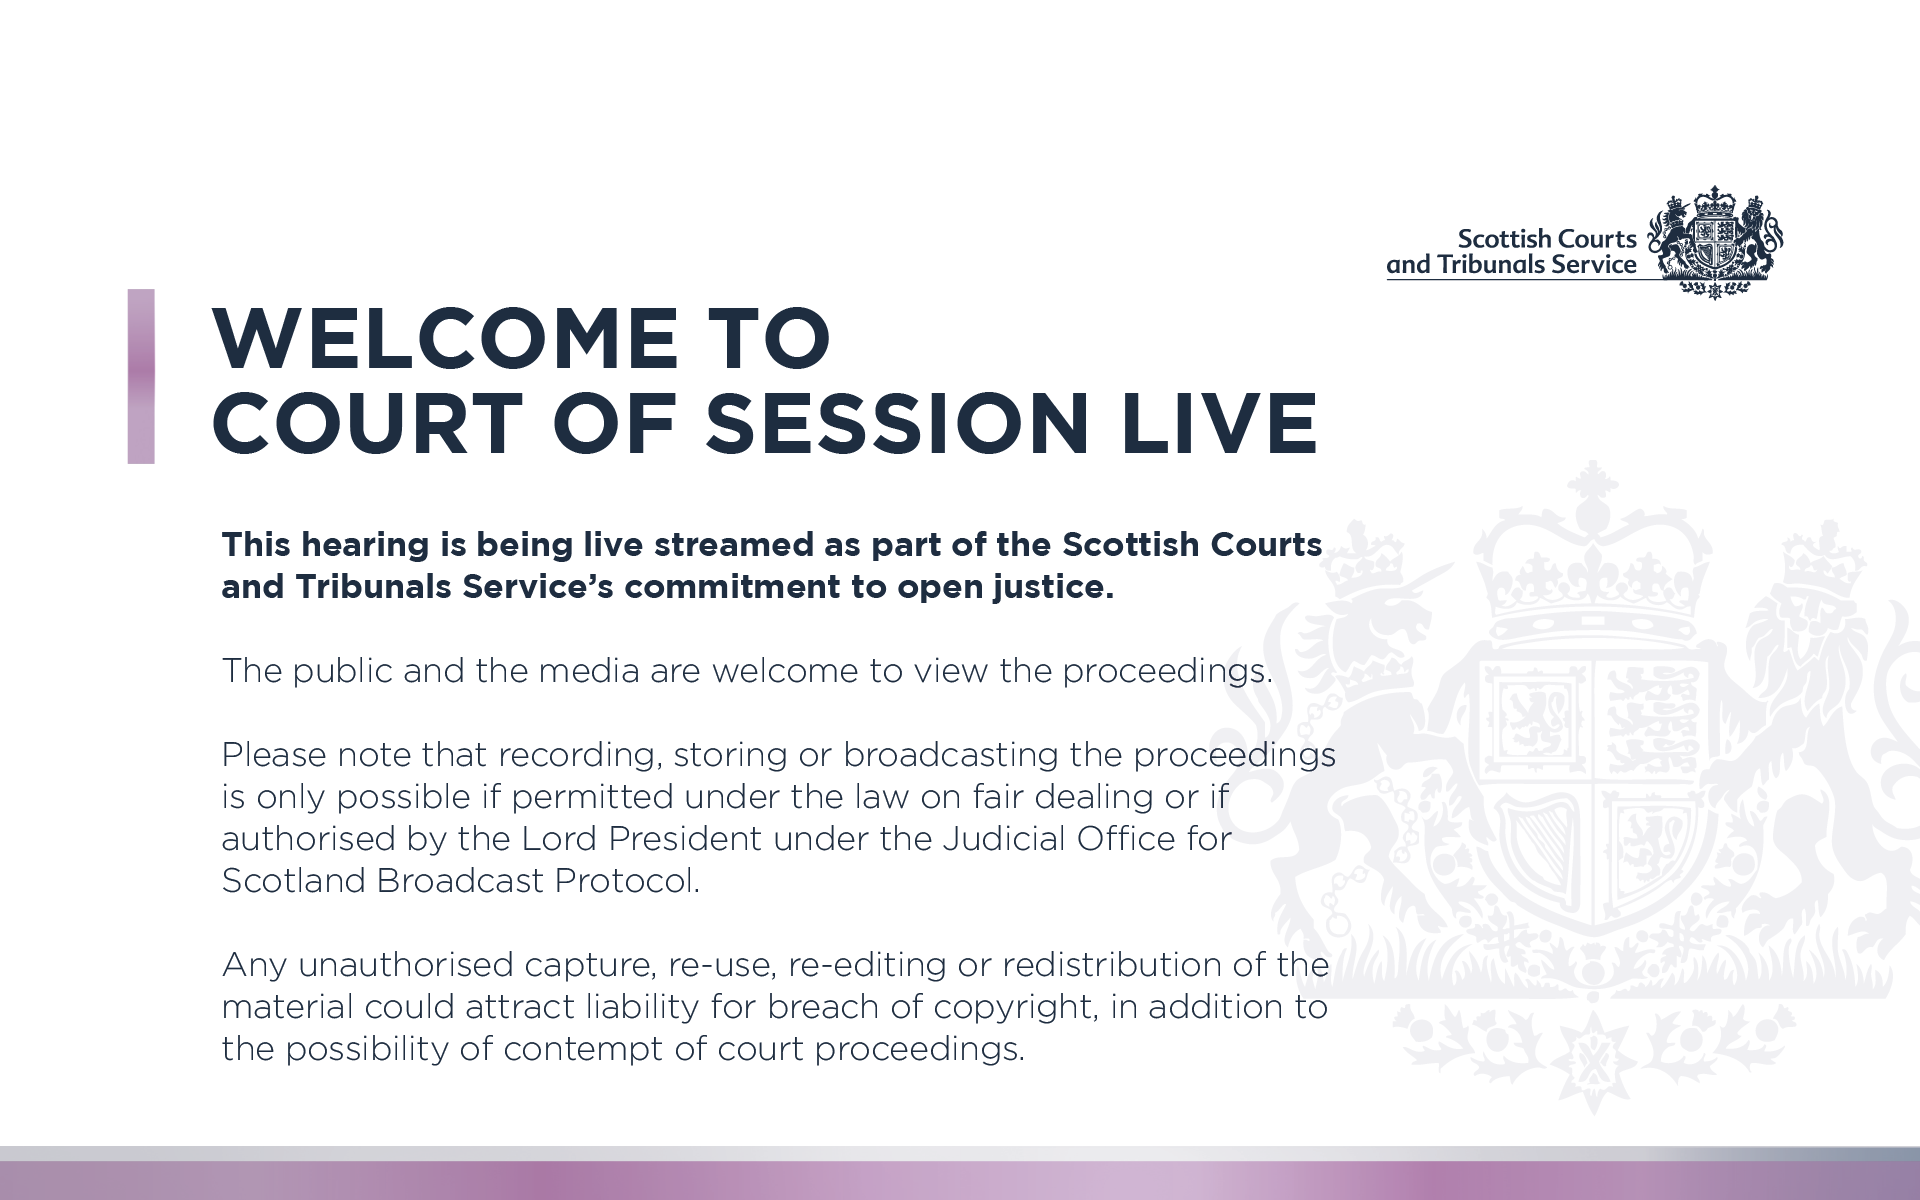 Welcome to Court of Session Live